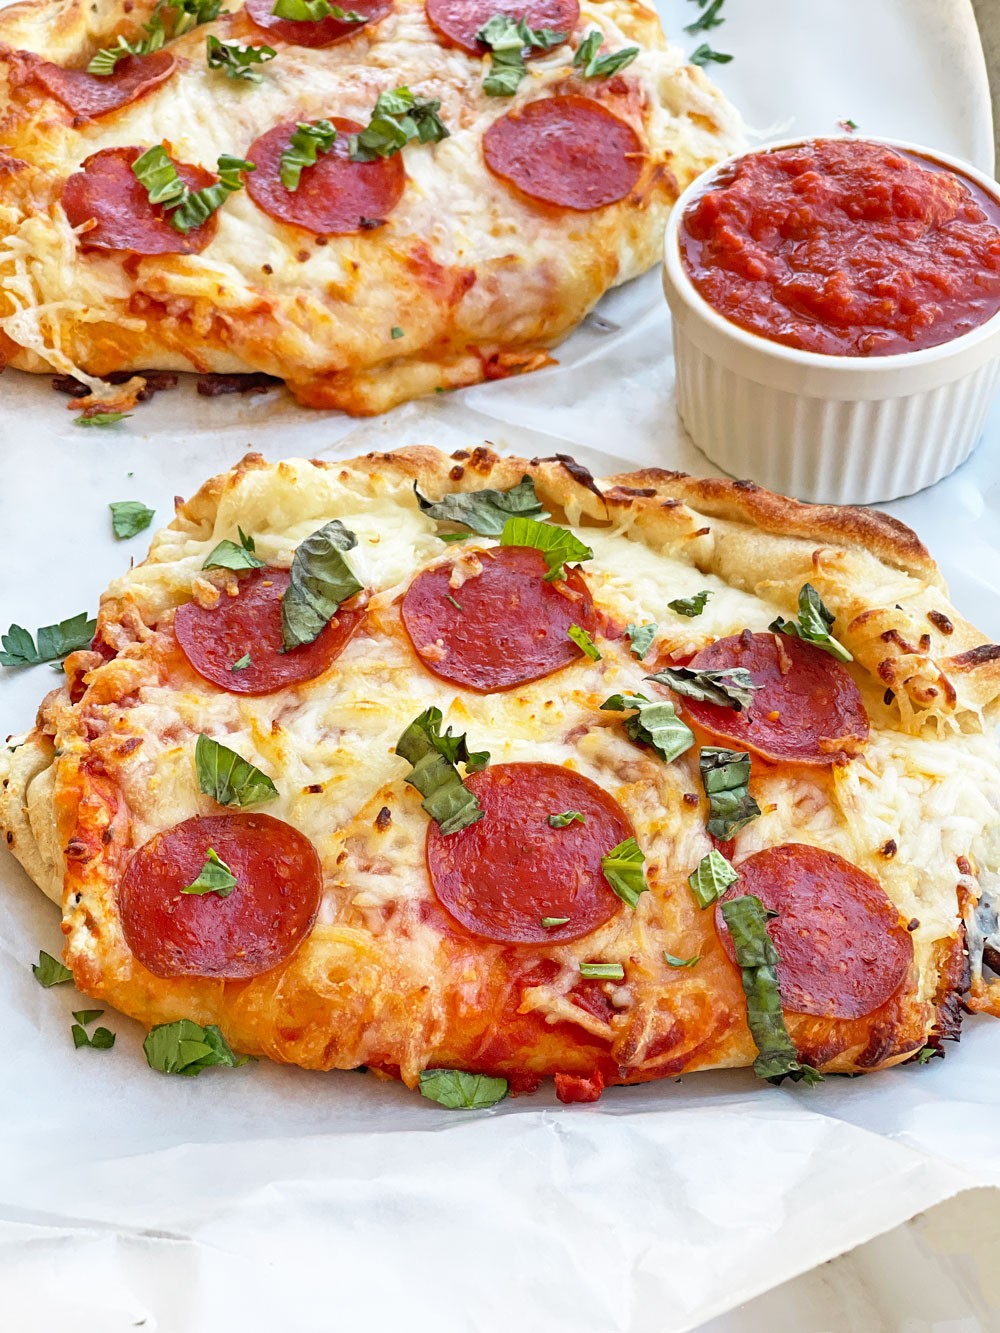 Pizza Calzone Recipe. This is the ultimate comfort food. This is an easy calzone recipe with a pepperoni topping. www.ChopHappy.com #pizzarecipe #calzonerecipe